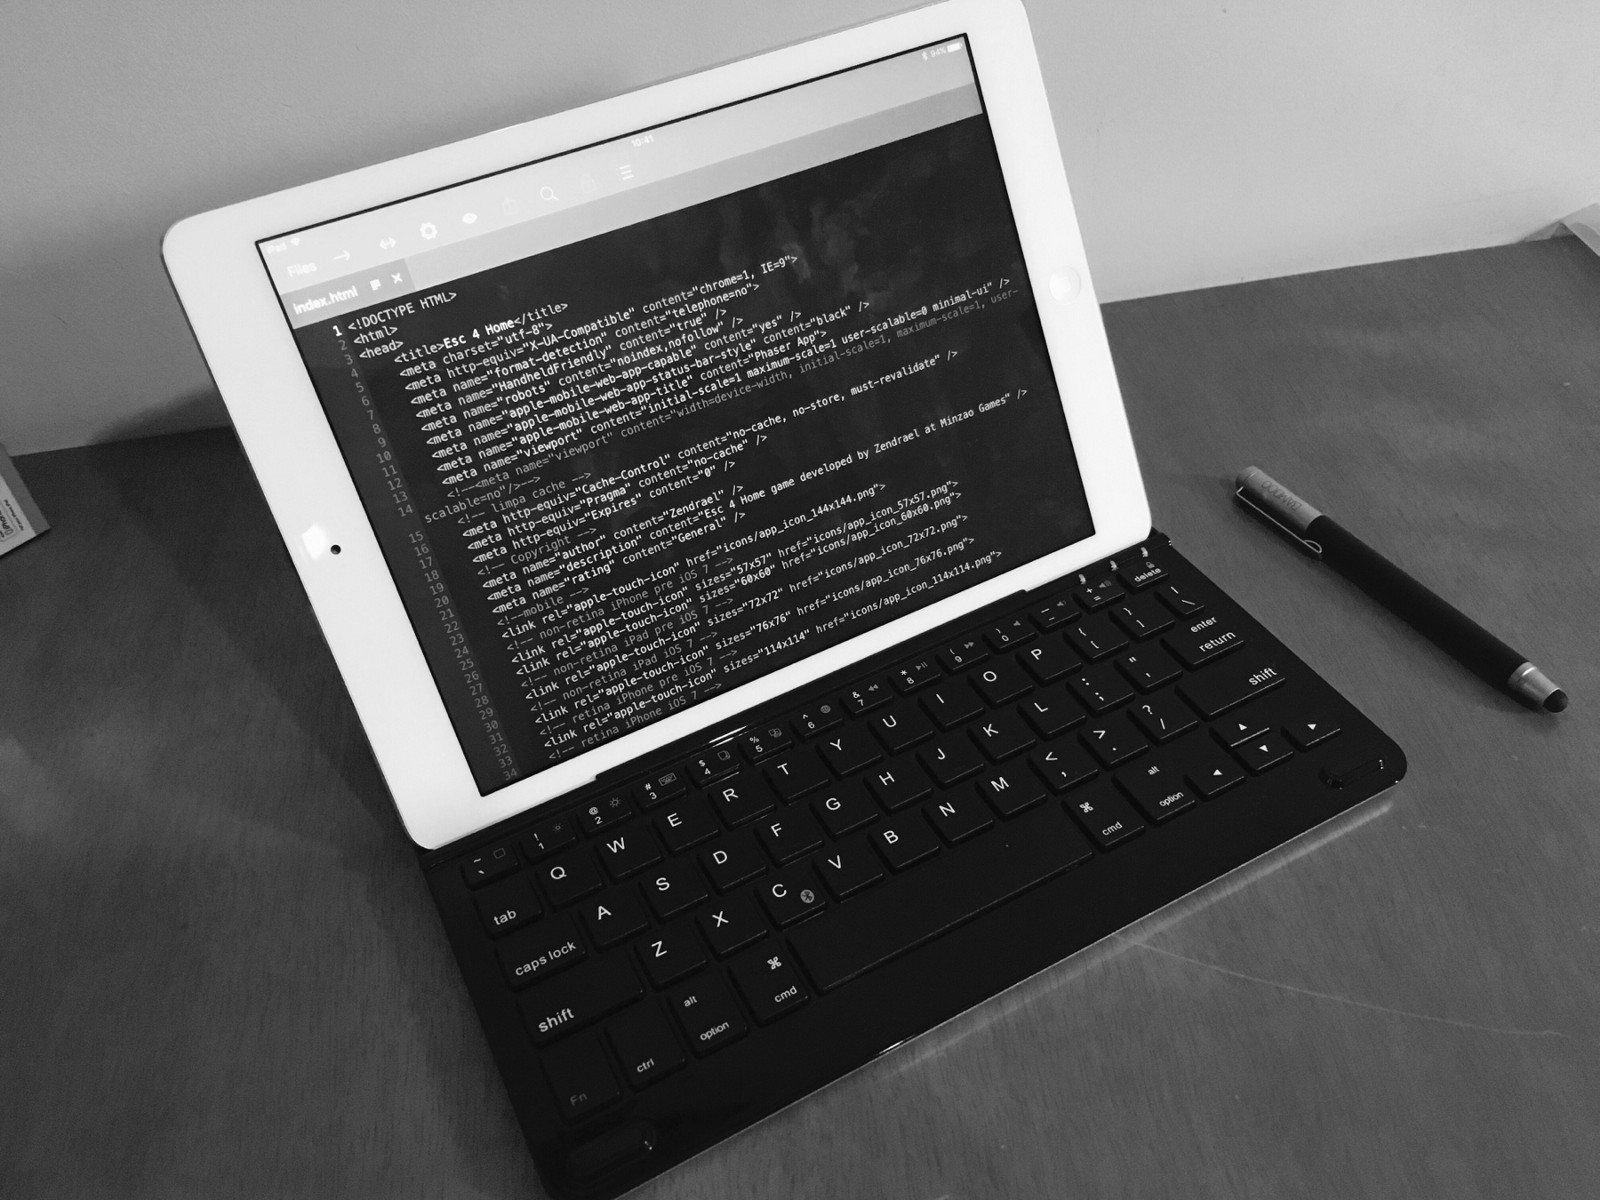 Reader article: using iPad as my primary computer